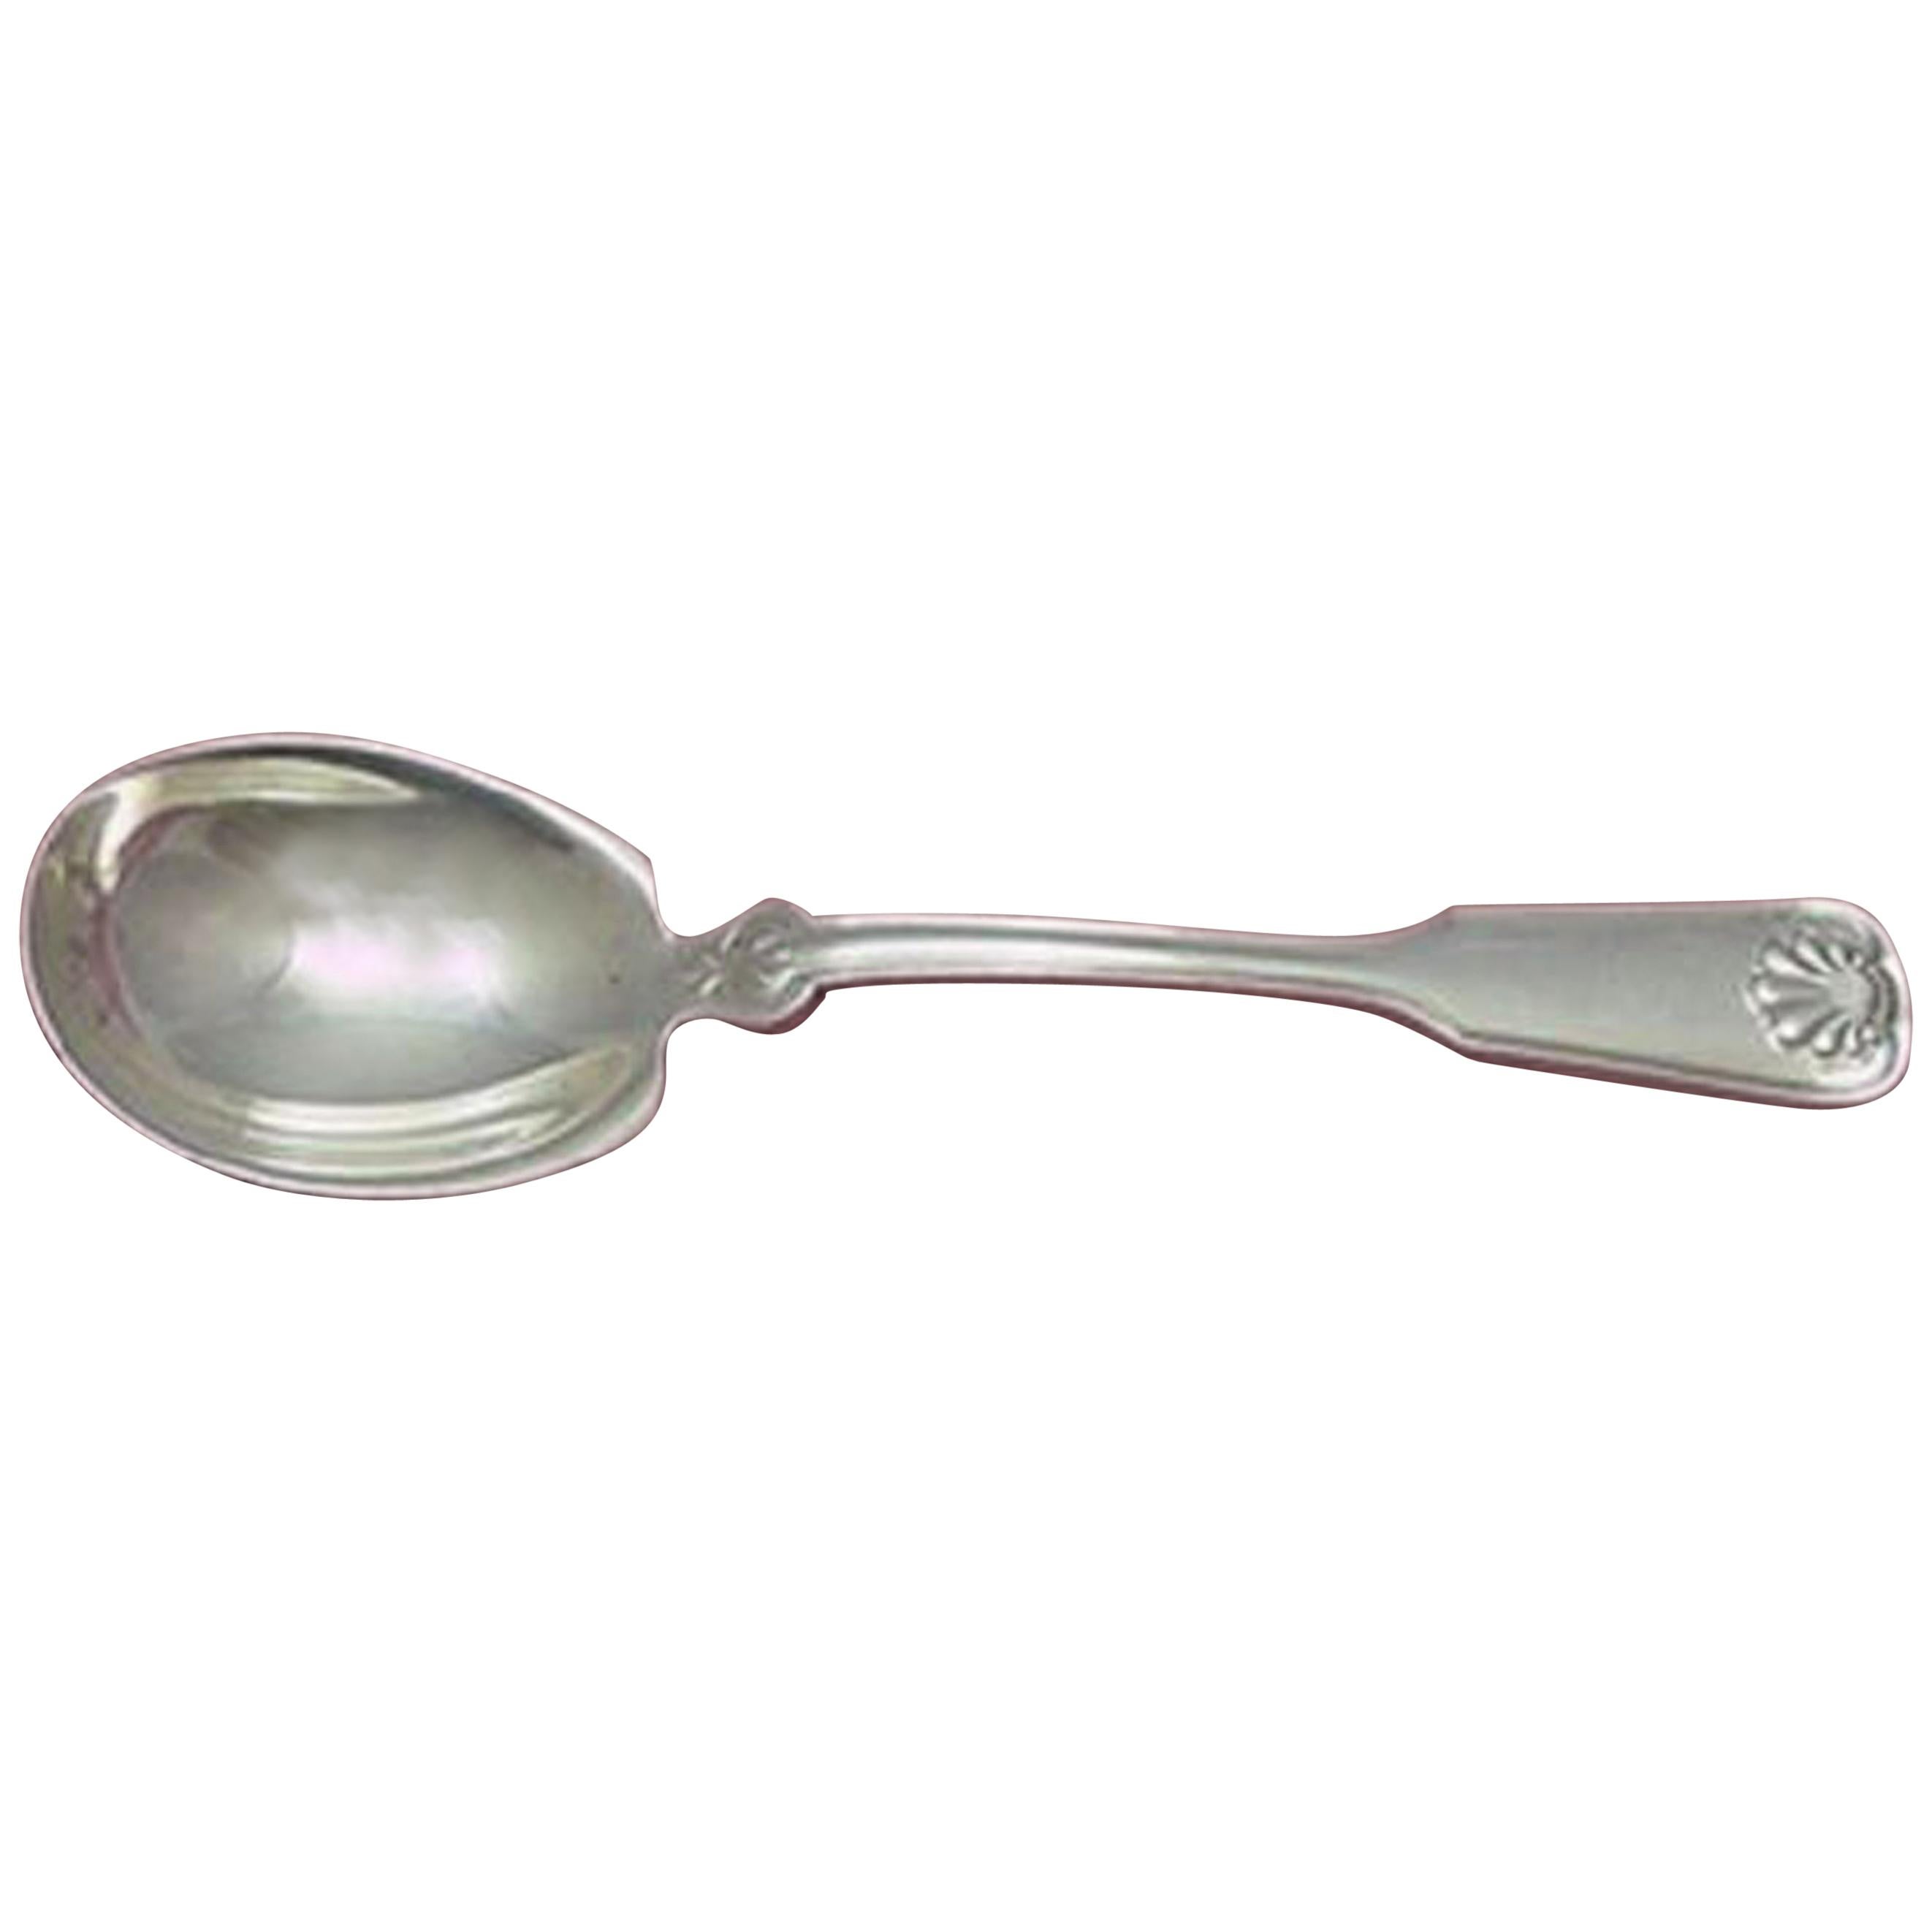 Shell and Thread by Tiffany & Co. Sterling Silver Sugar Spoon